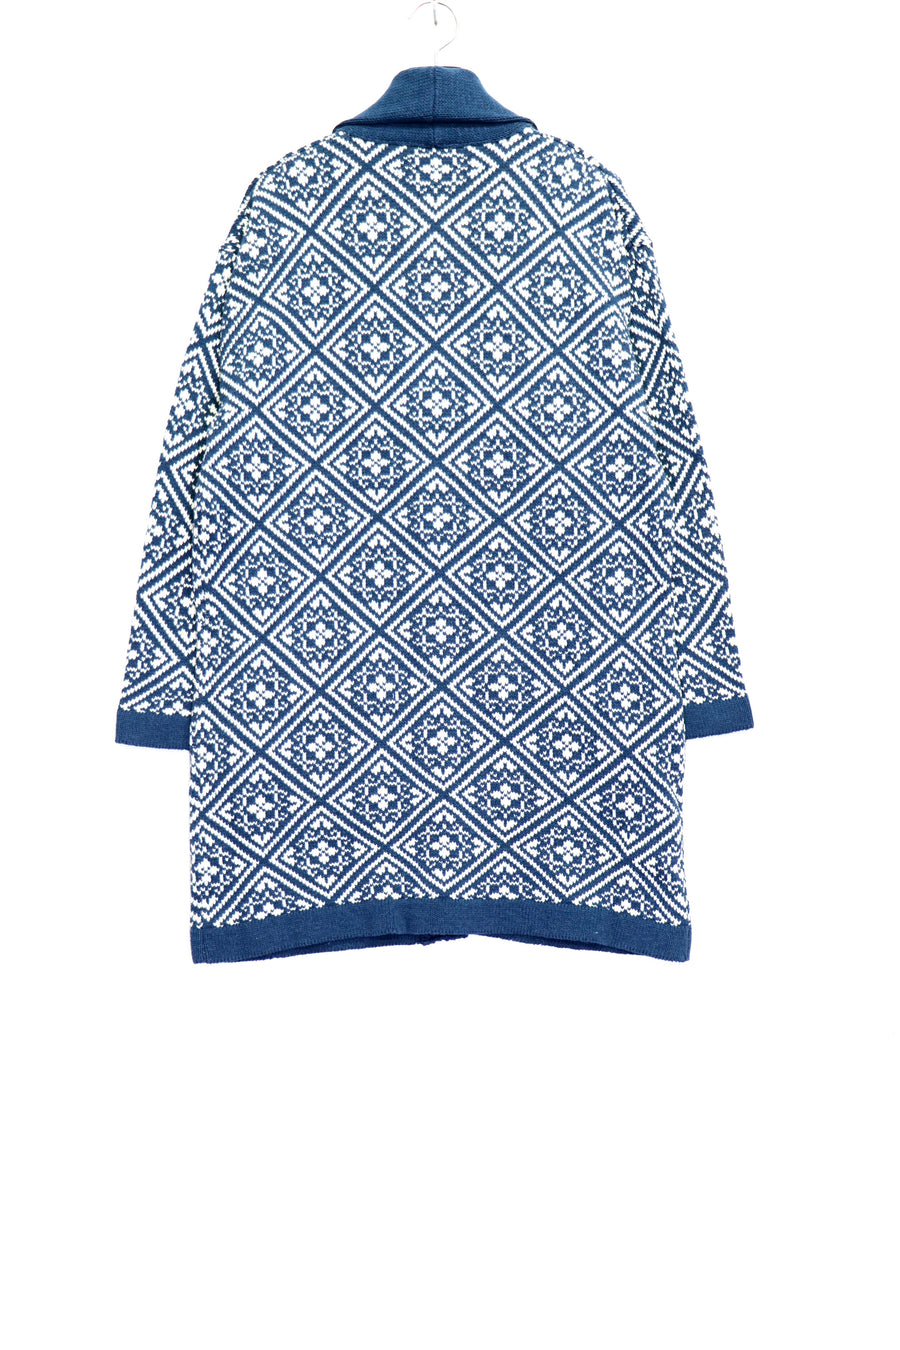 Taiga Igari  Tile Knit Gown Coat(BLUE OFF WHITE)